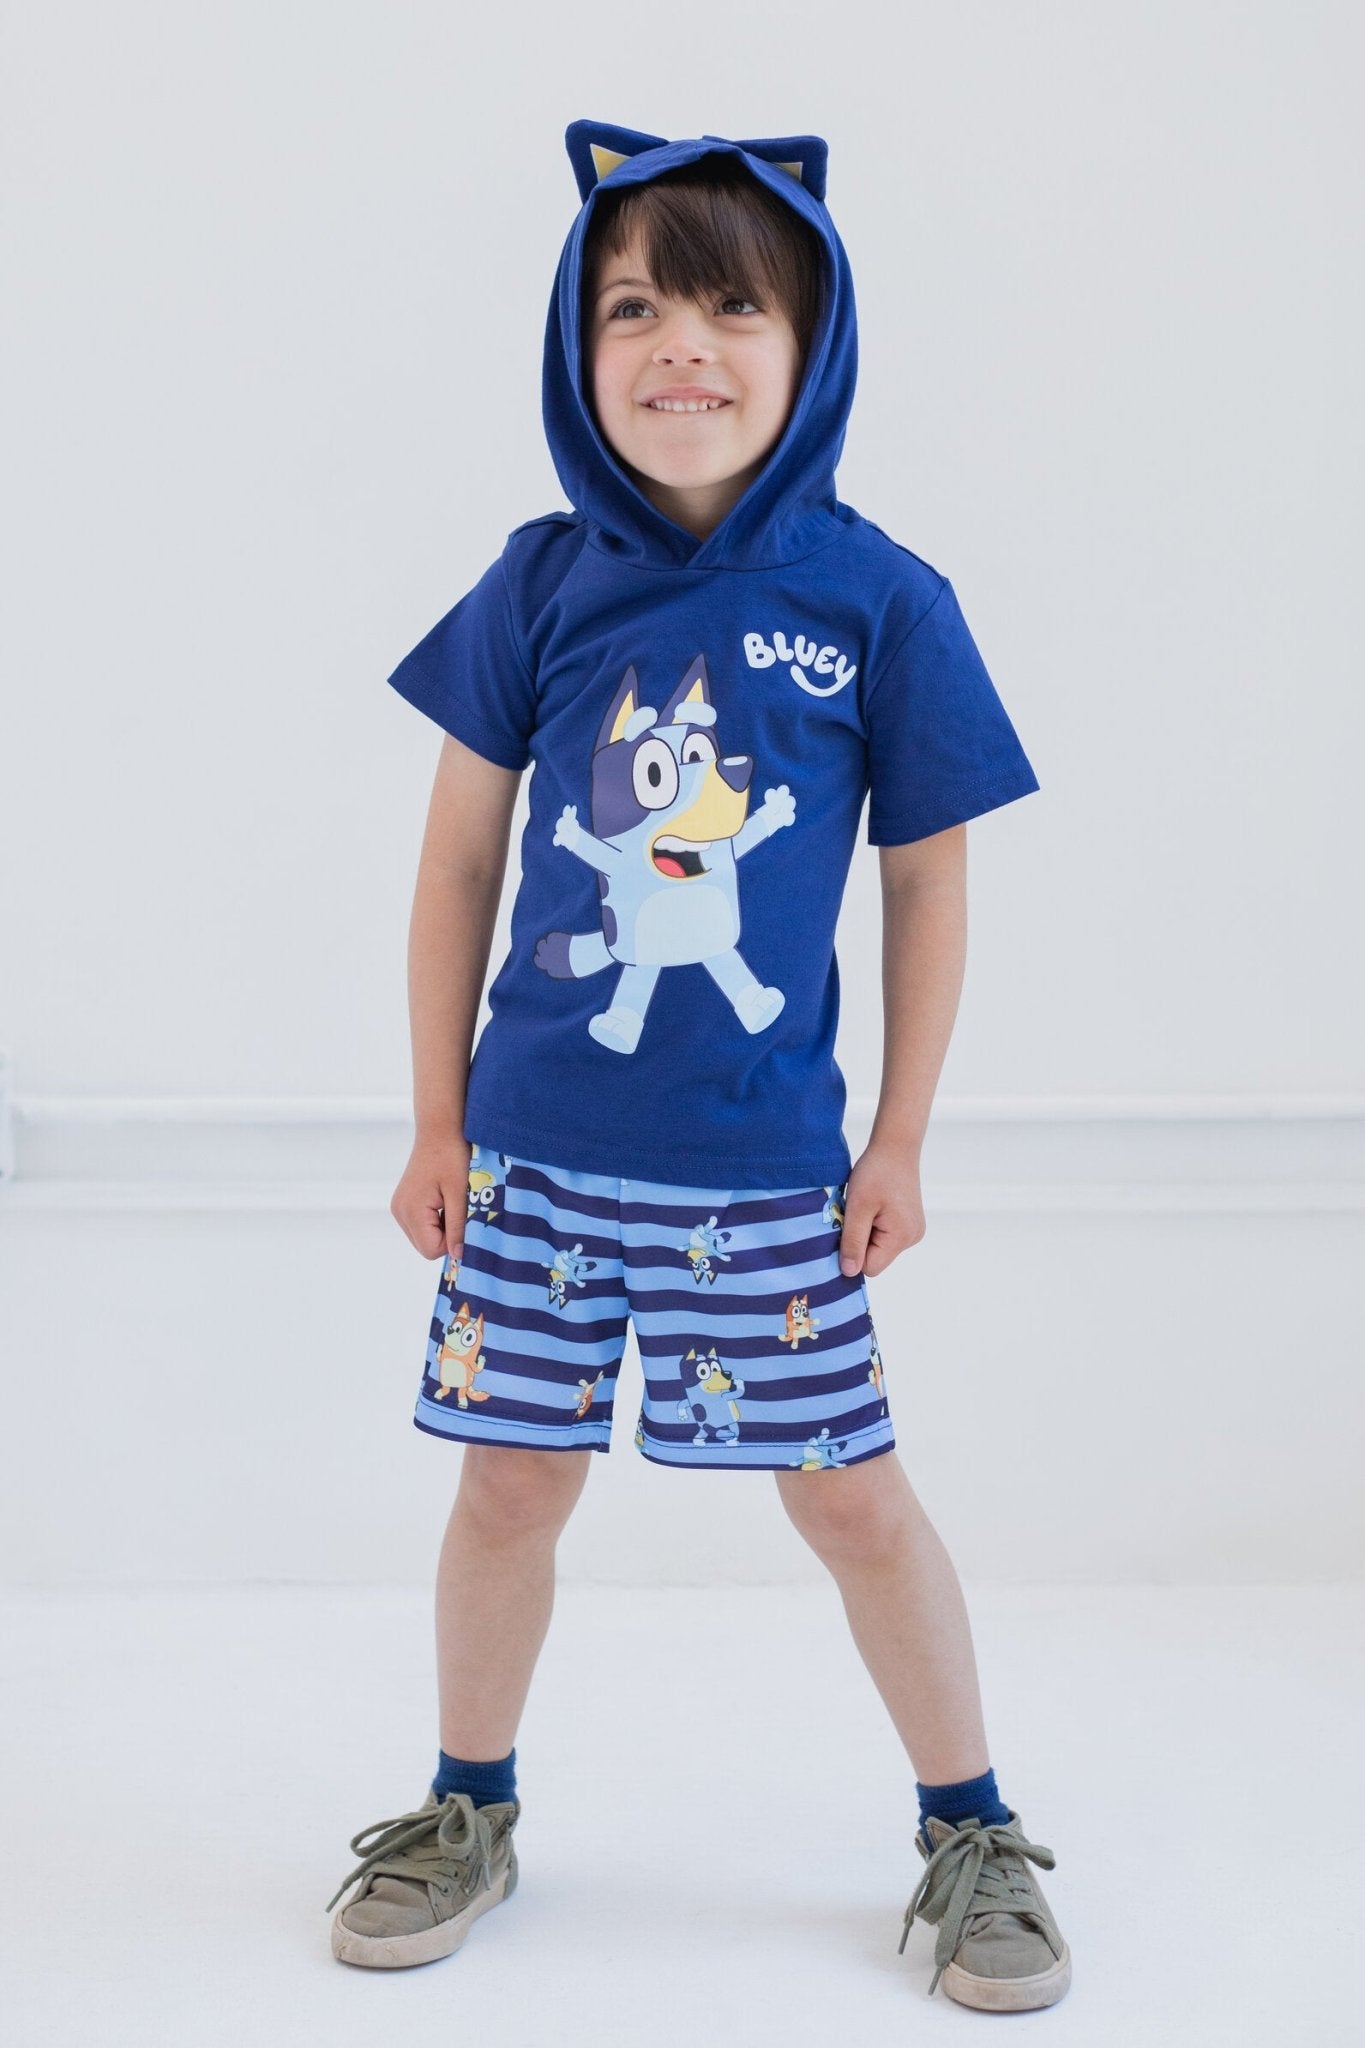 Bluey Cosplay T-Shirt and Mesh Shorts Outfit Set - imagikids